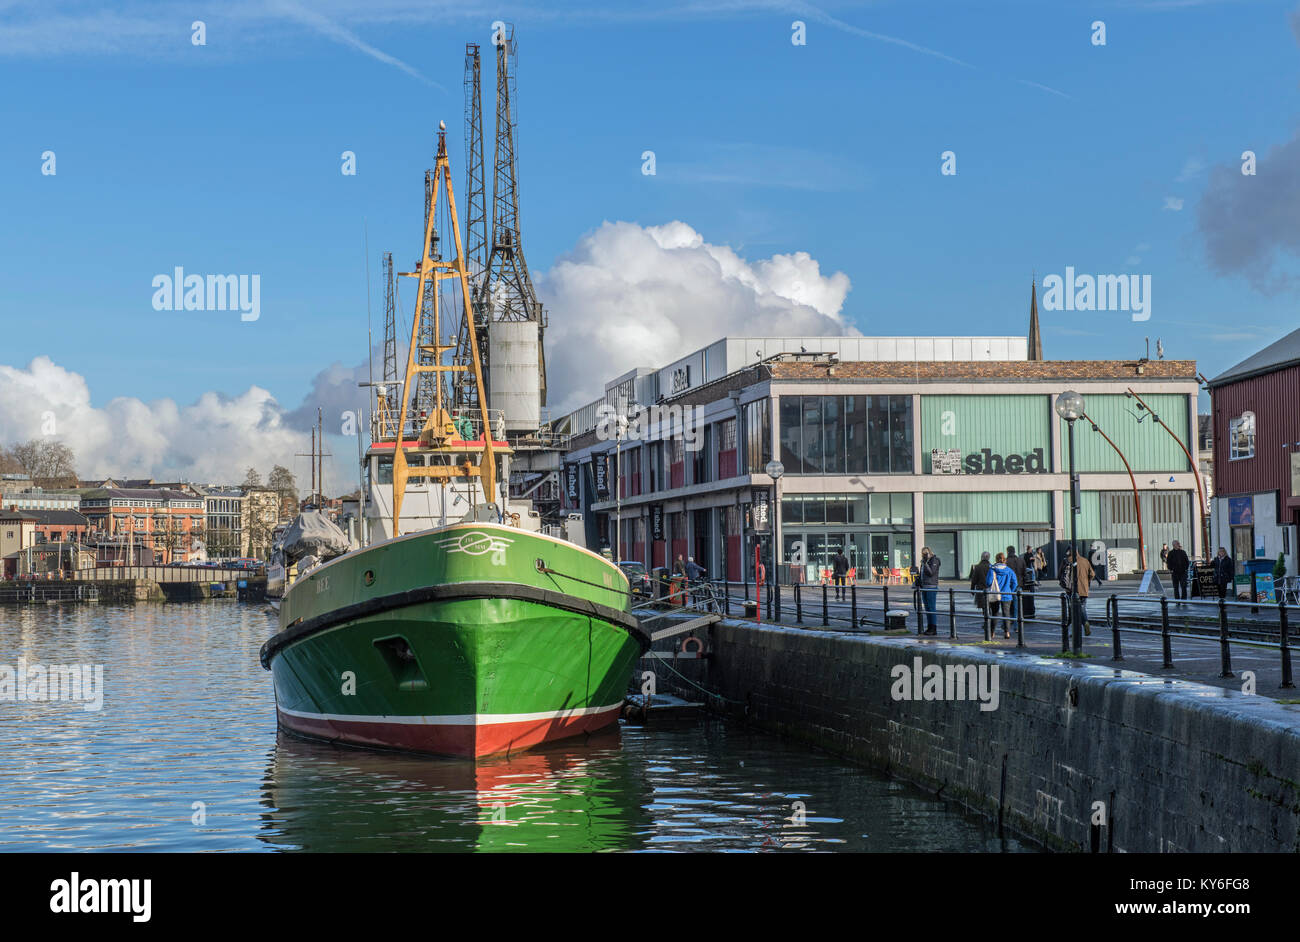 Bristol Harbour showing the MSheds and Bee, a green fishing trawler now permanently moored. Stock Photo